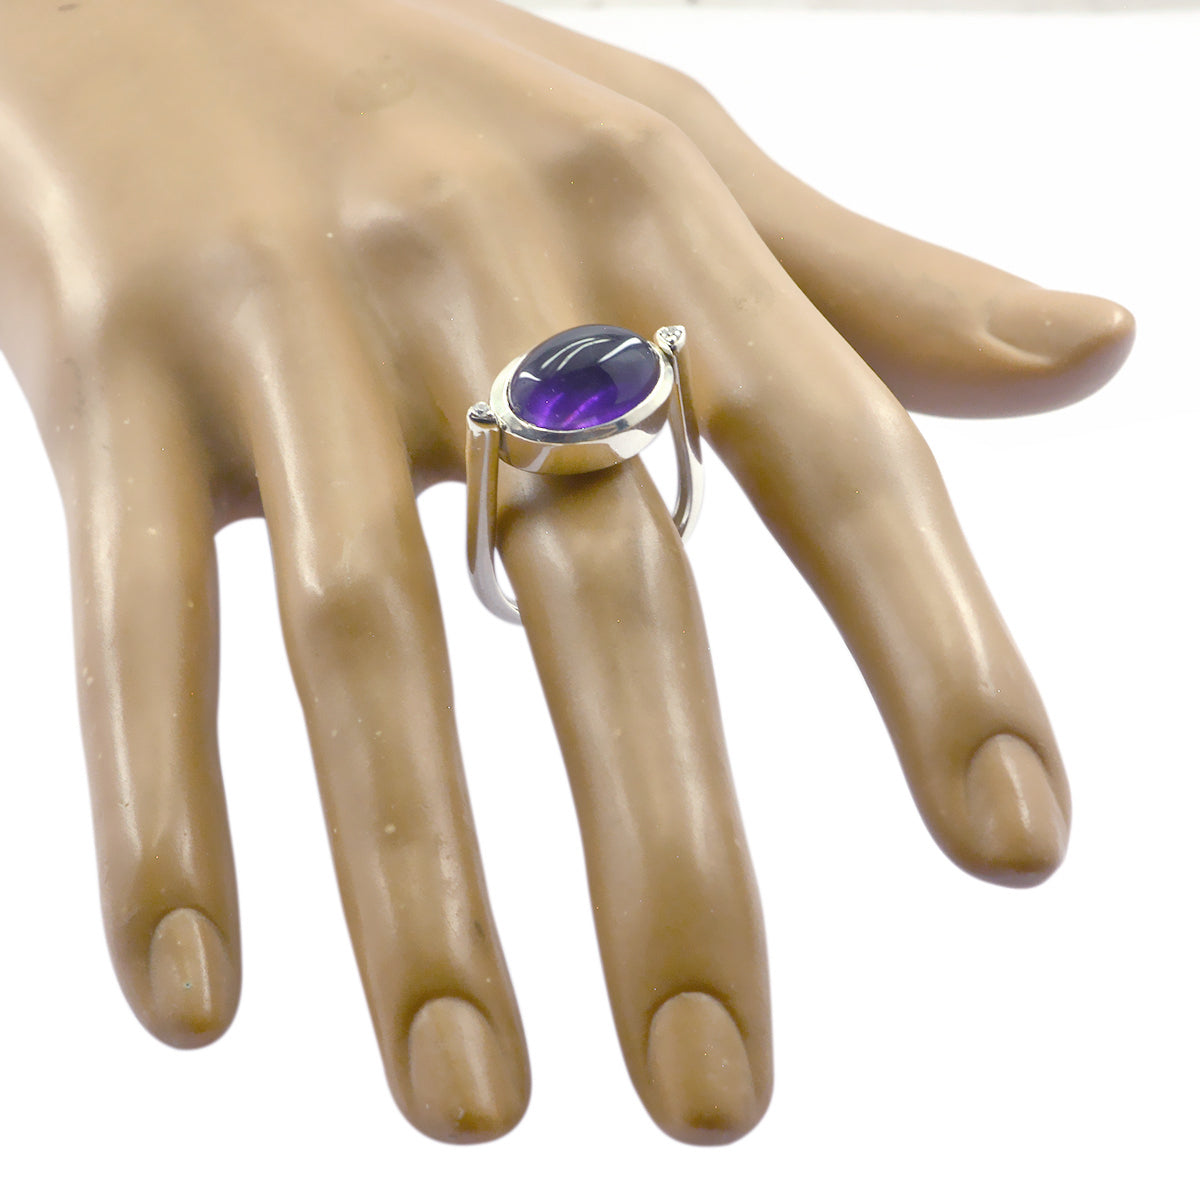 Flawless Gemstone Amethyst 925 Silver Rings Best Place To Sell Jewelry